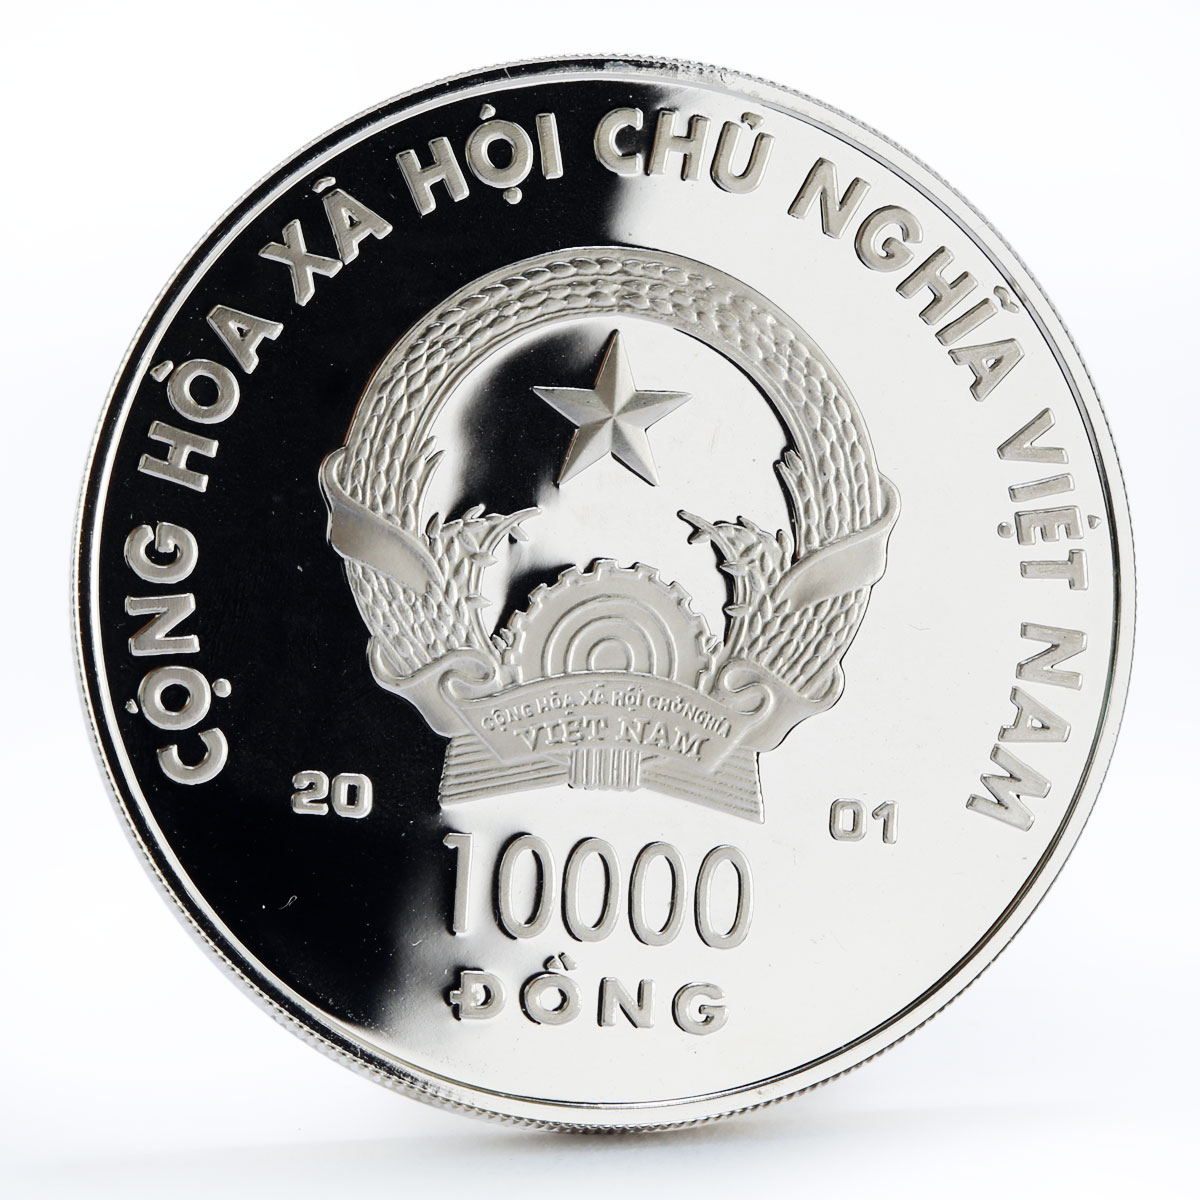 Vietnam 10000 dong Year of the Snake colored silver coin 2001